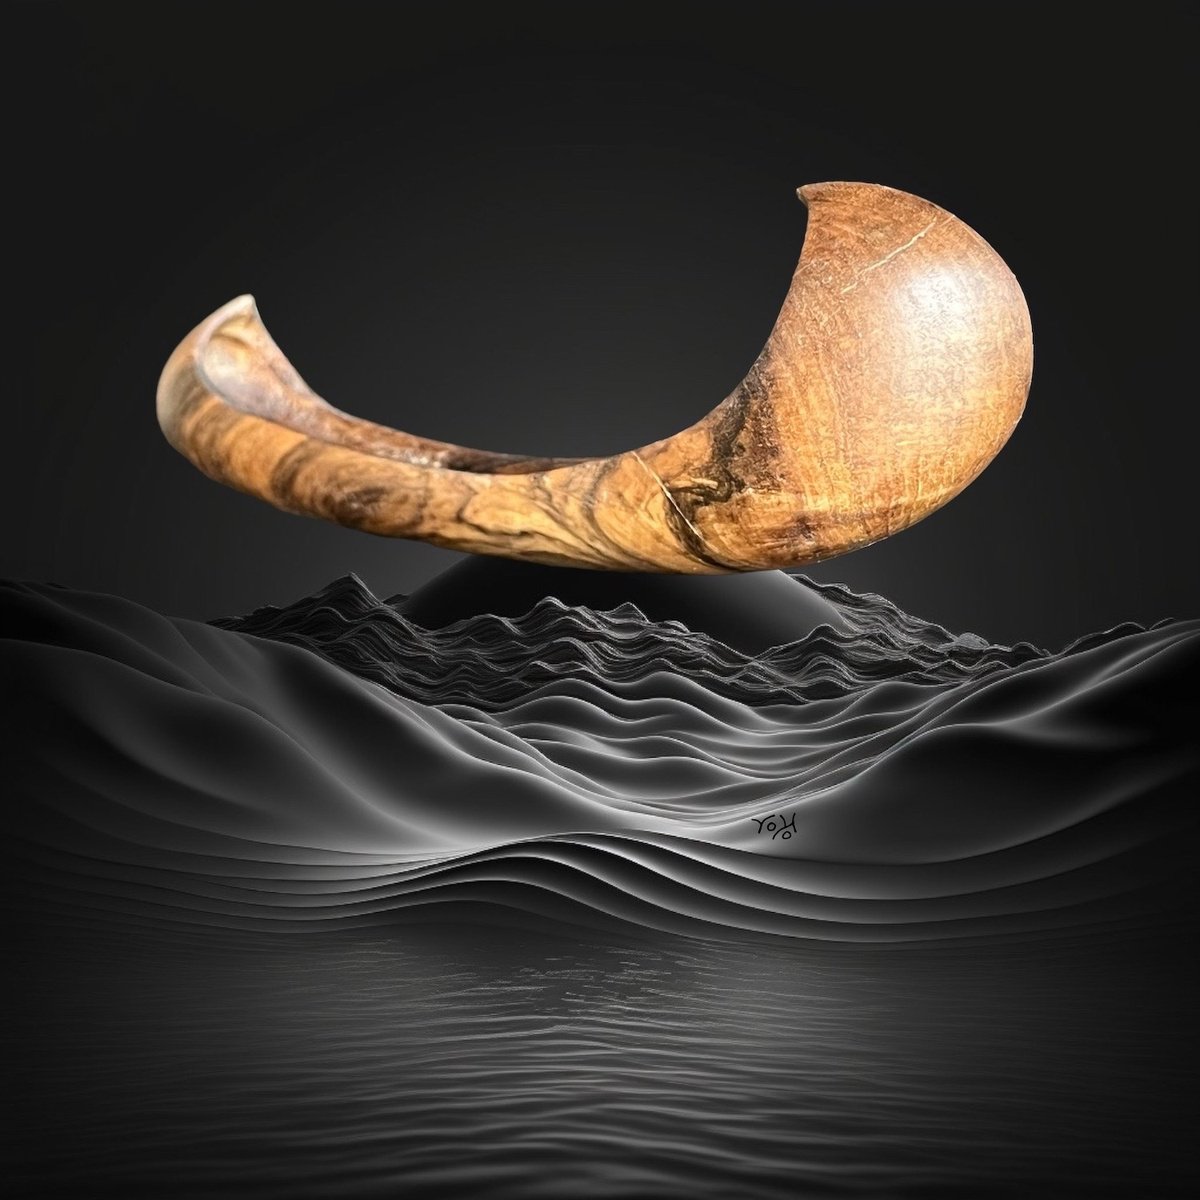 Dugout Canoe Trophy by Roland K�pfer